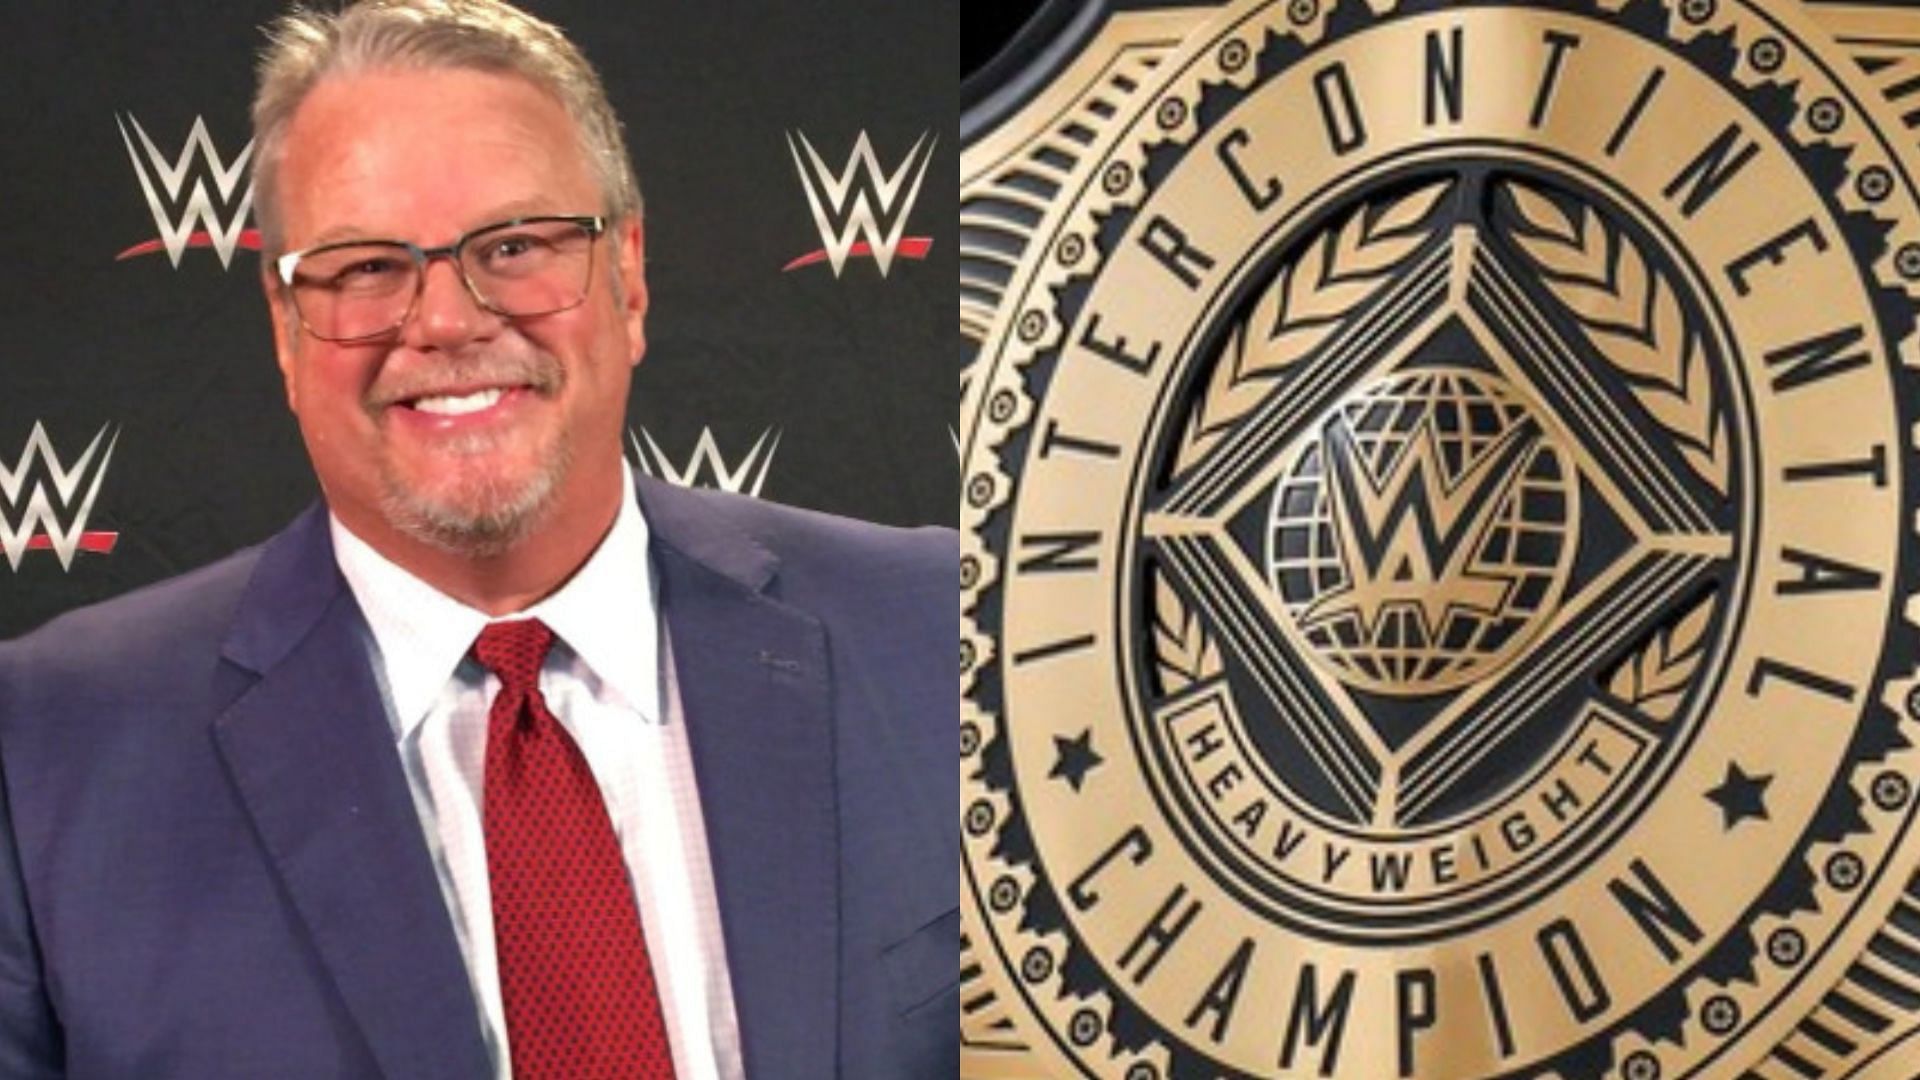 Which former WWE Intercontinental Champion did no one care about according to Bruce Prichard?